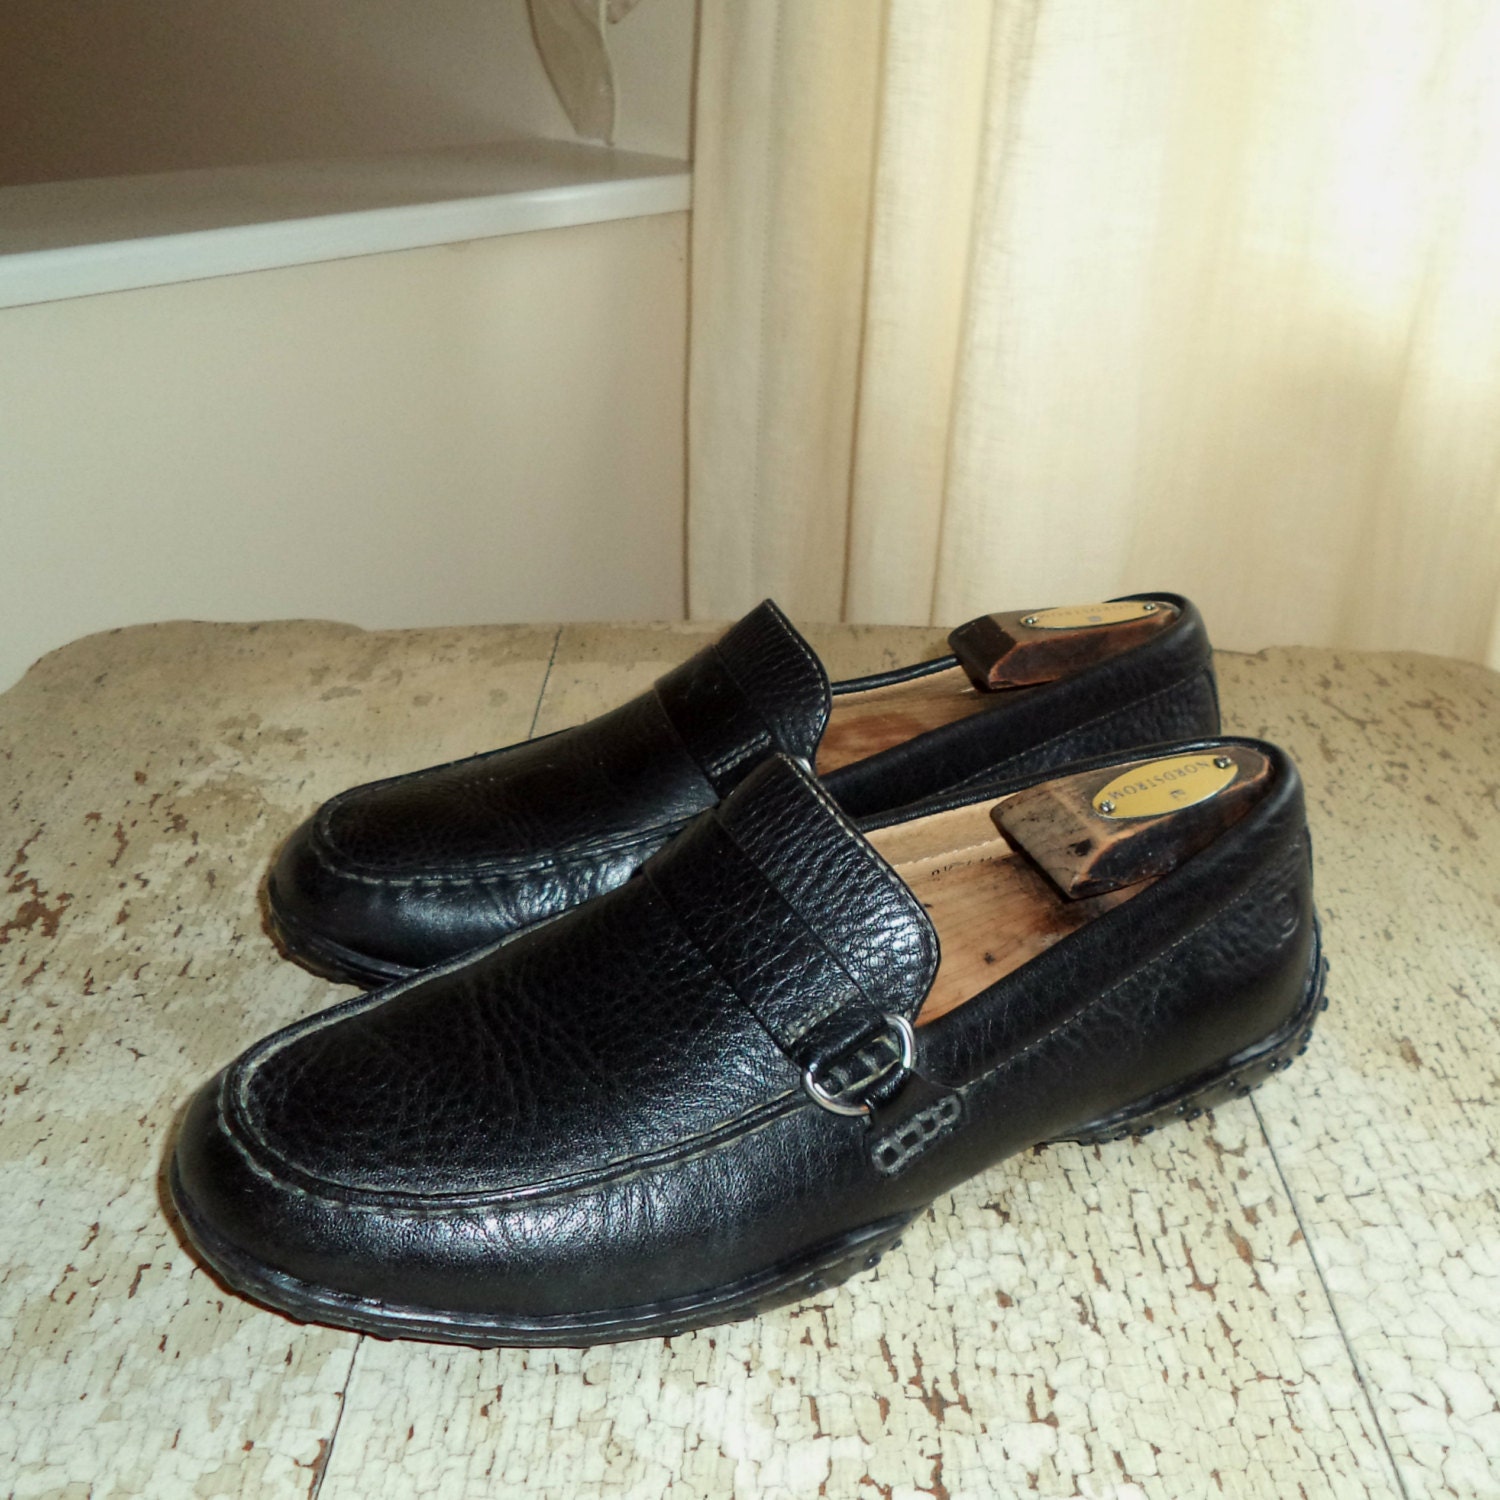 CLEARANCE 9.5 Men's BORN DRIVERS Shoes Loafers Full Grain